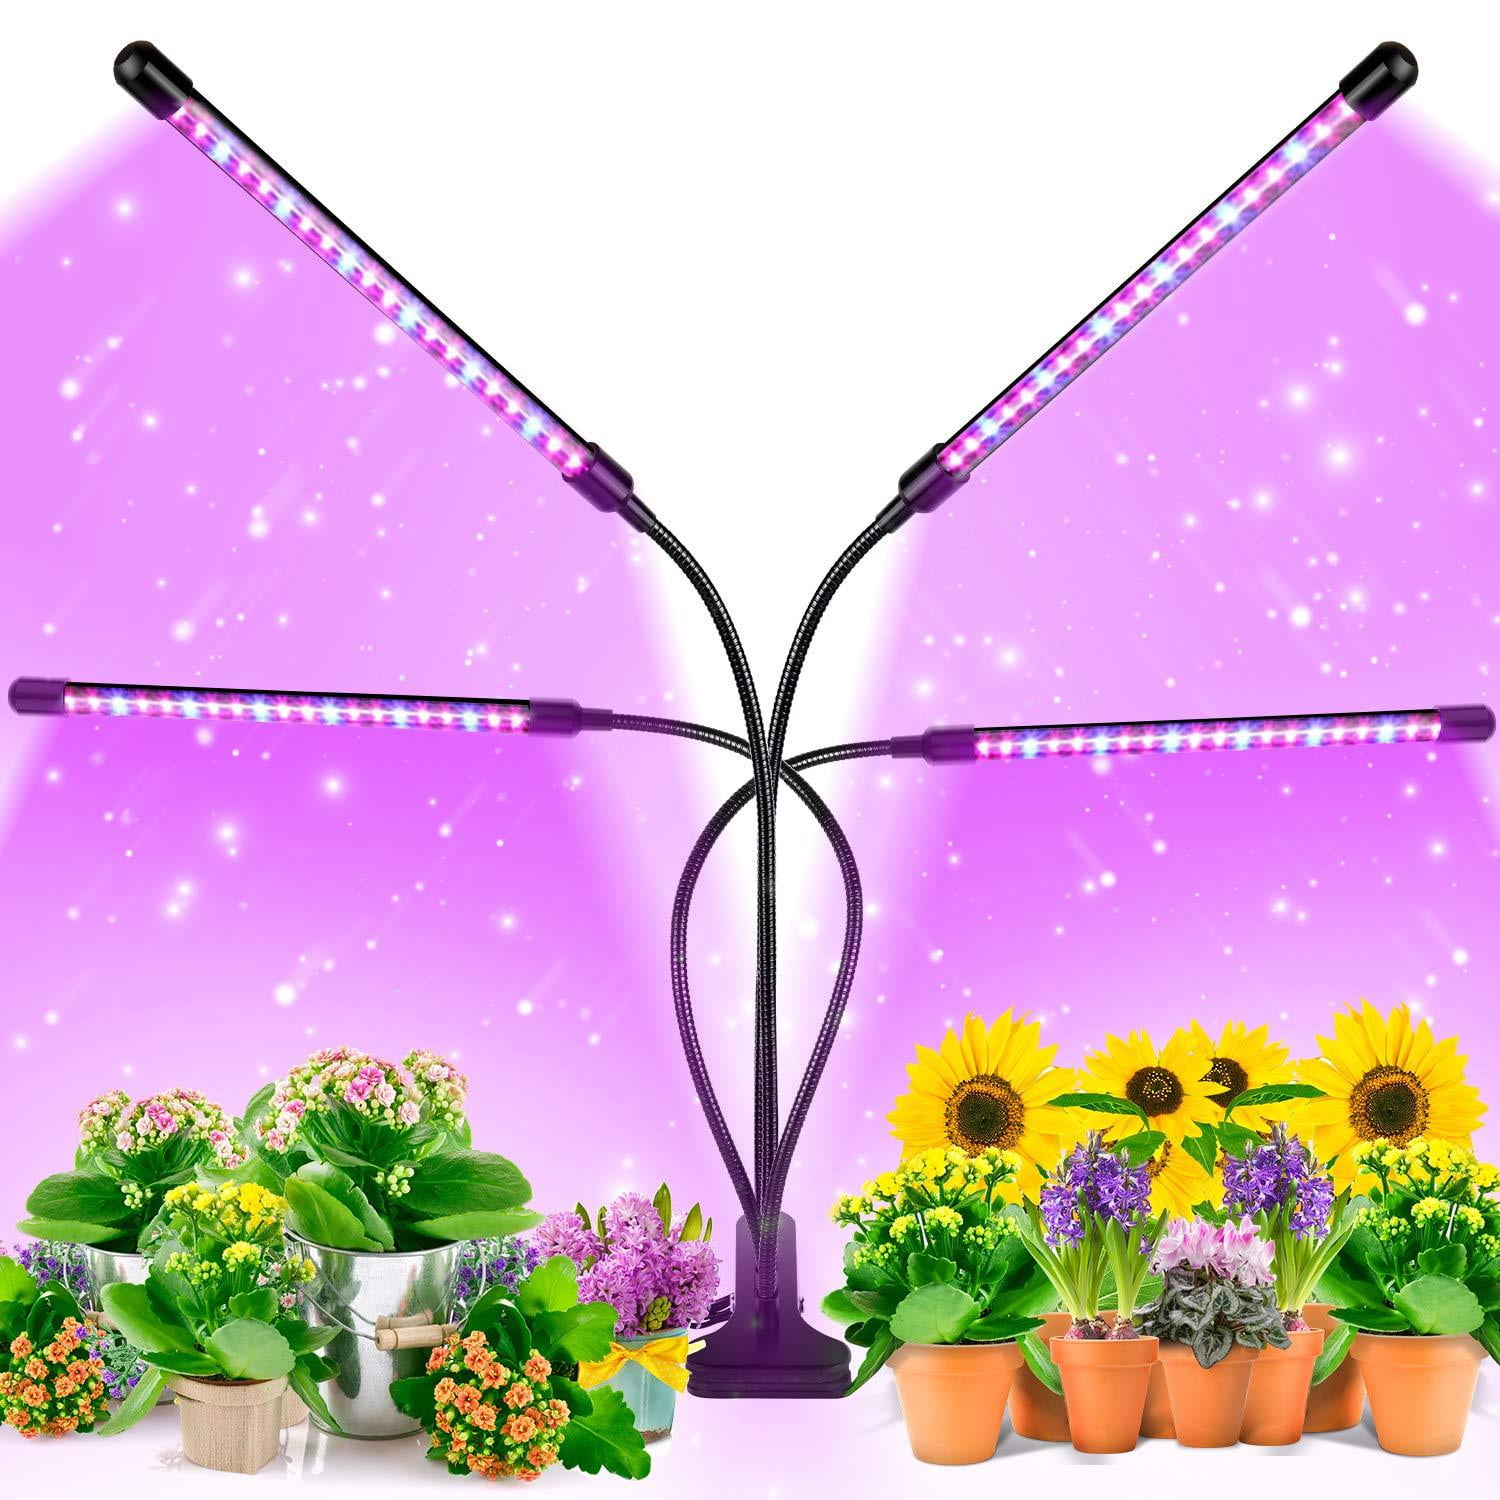 9 Dimmable Brightness for Indoor Succulent Plants Growth,hydroponics Supplies Grow Light for Indoor Plants Full Spectrum,LED Grow Lights,80W Full Spectrum Plant Lights with Auto ON/Off 3/9/12H Timer 